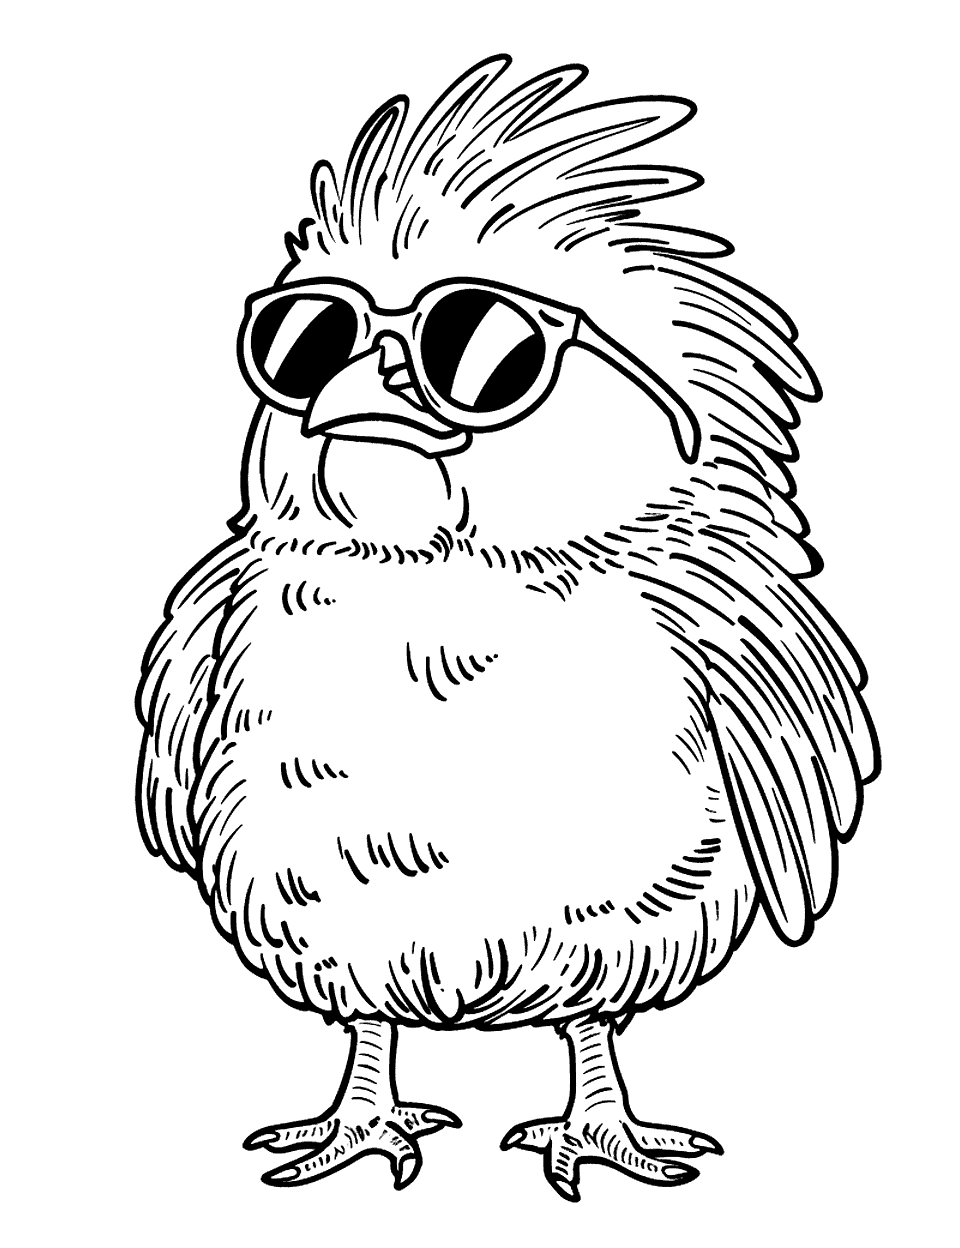 Kawaii Chicken in Sunglasses Coloring Page - A super cute kawaii-style chicken wearing oversized sunglasses.